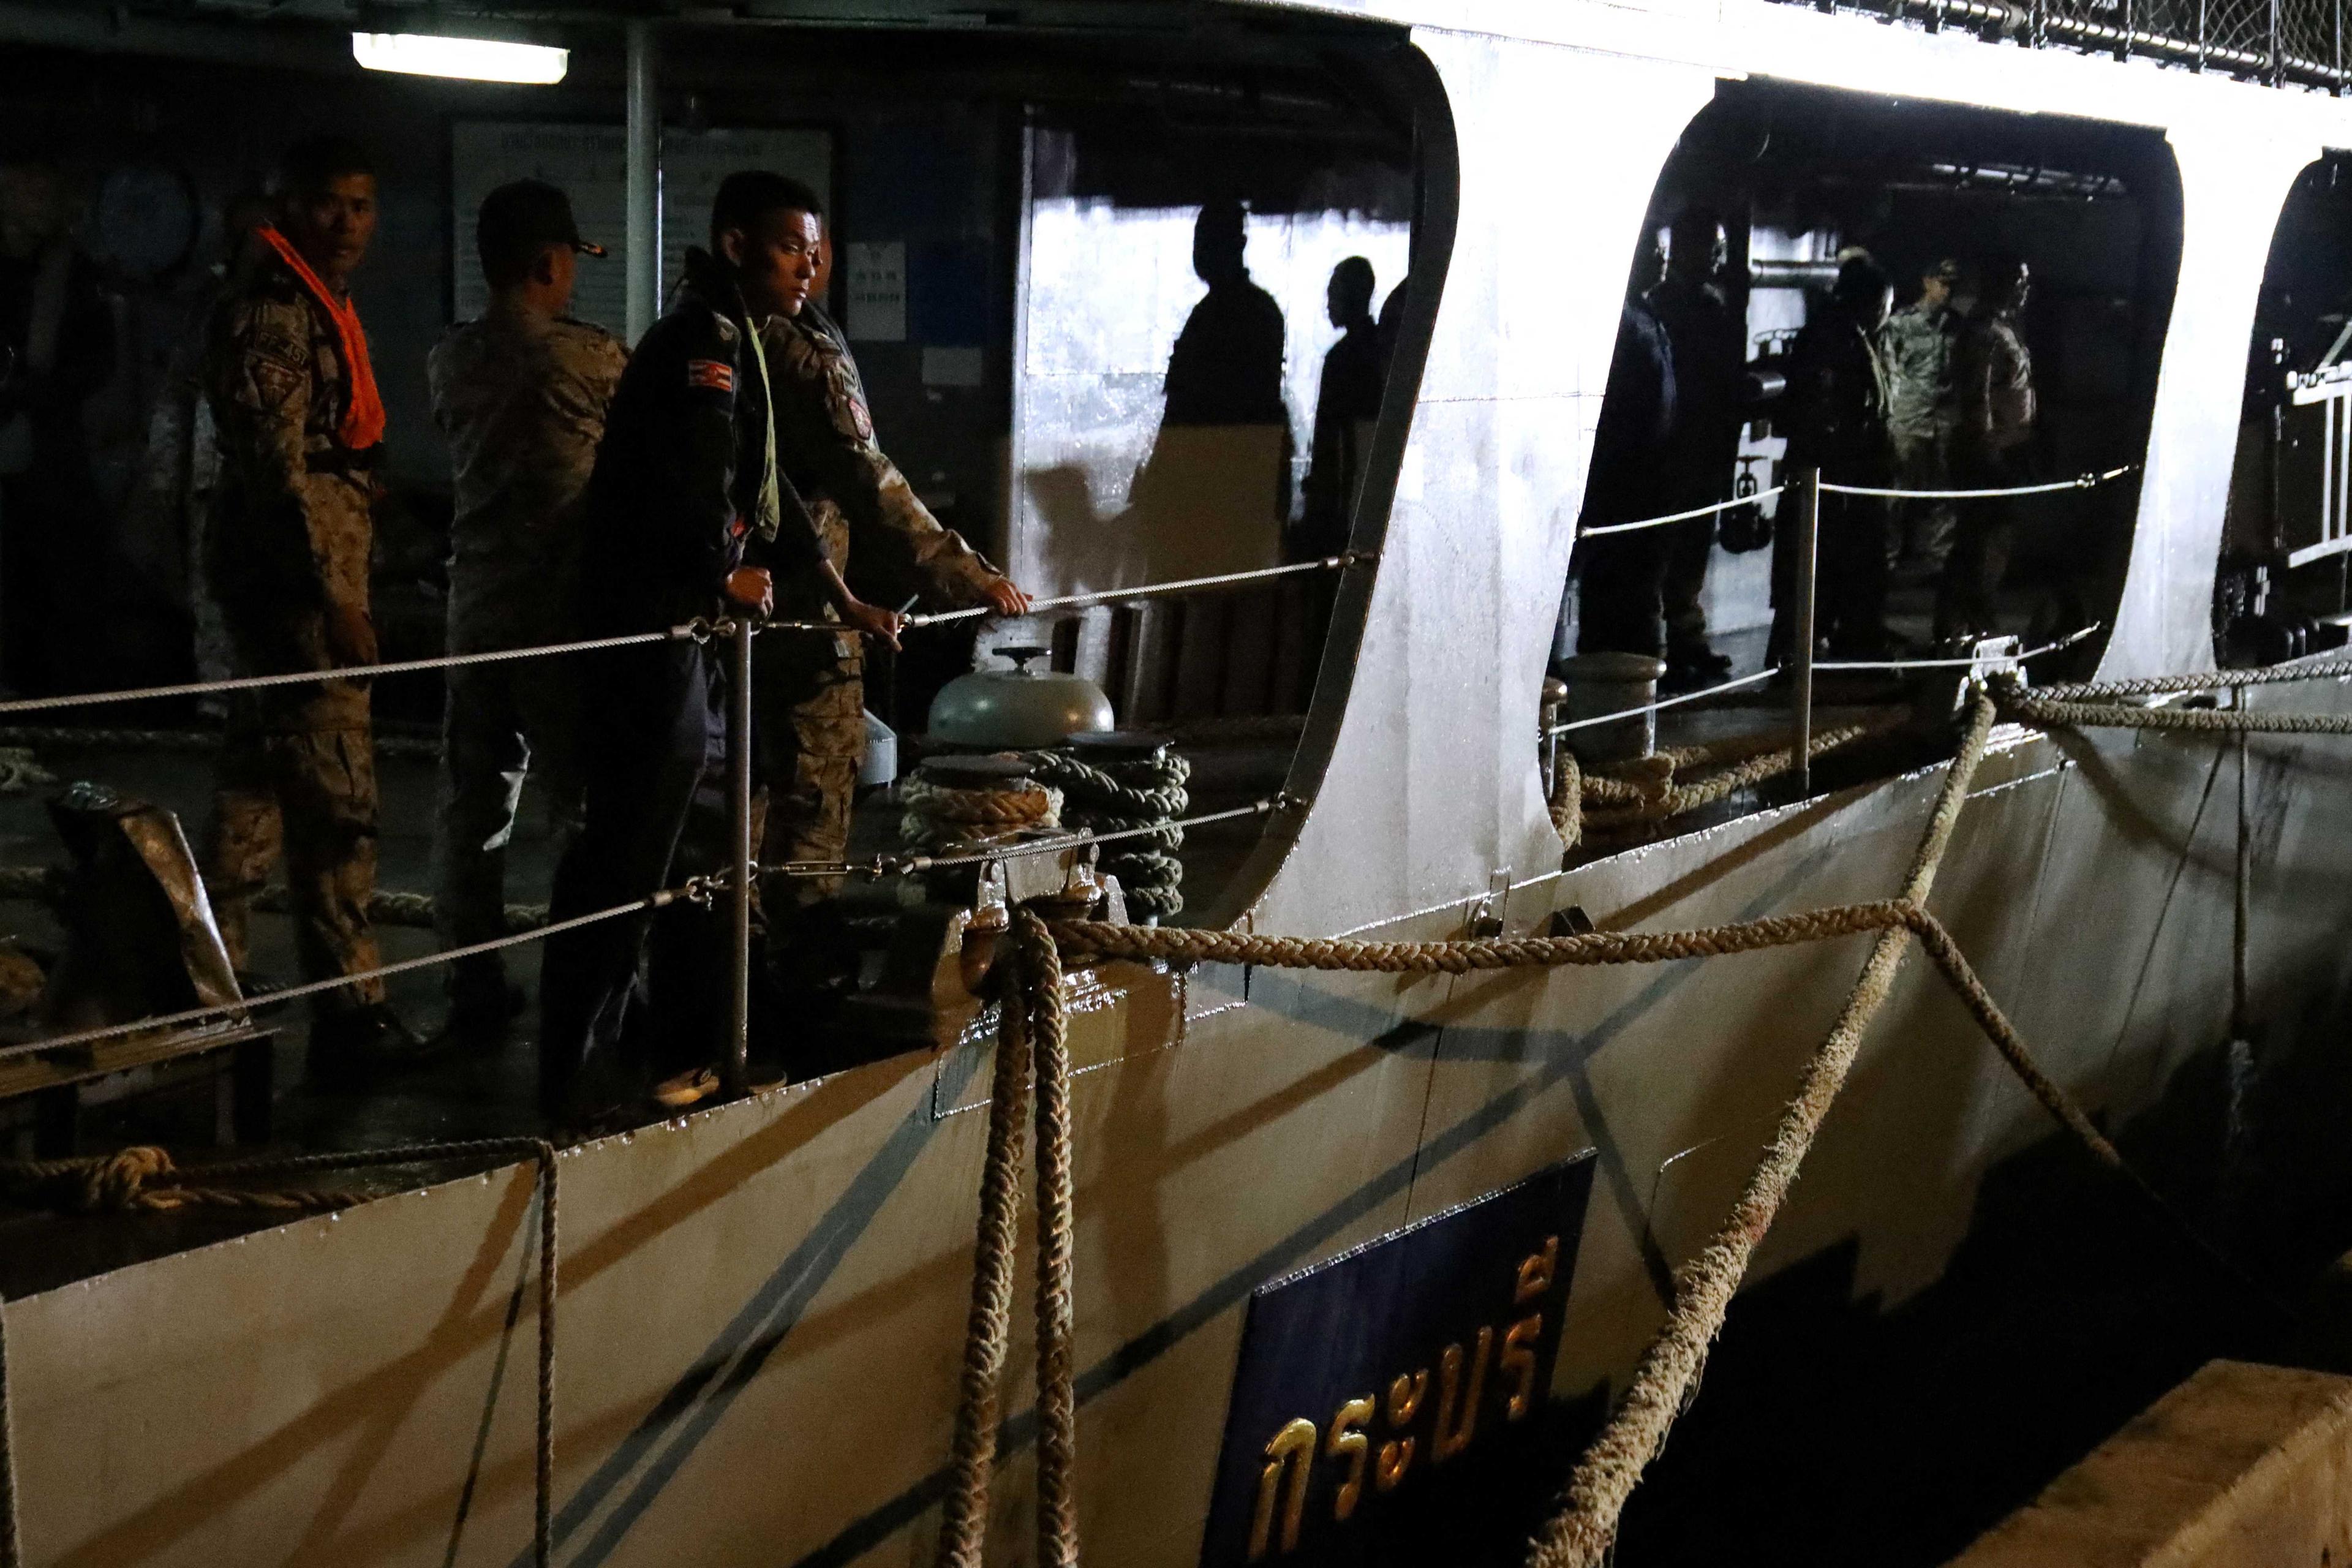 Crew members from Royal Thai Navy are seen docked as they return from a rescue mission after a Navy corvette sank in the Gulf of Thailand, in Prachuap Khiri Khan province, Thailand Dec 19. Photo: Reuters